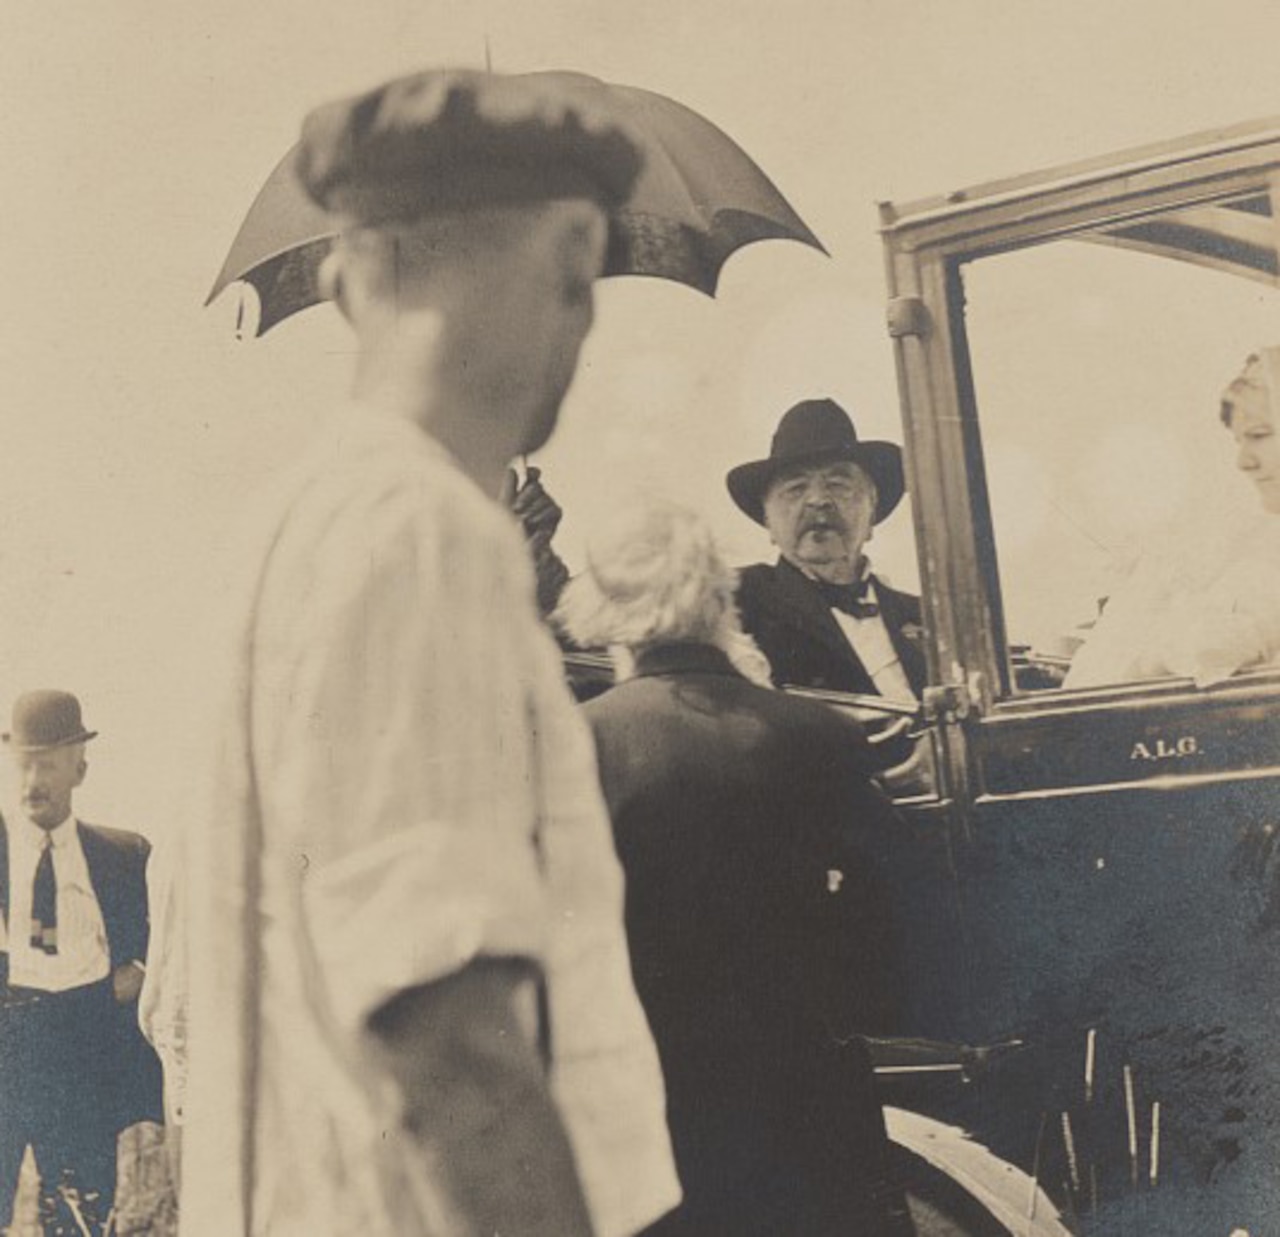 A man sits in an early-era vehicle while two others look at him.